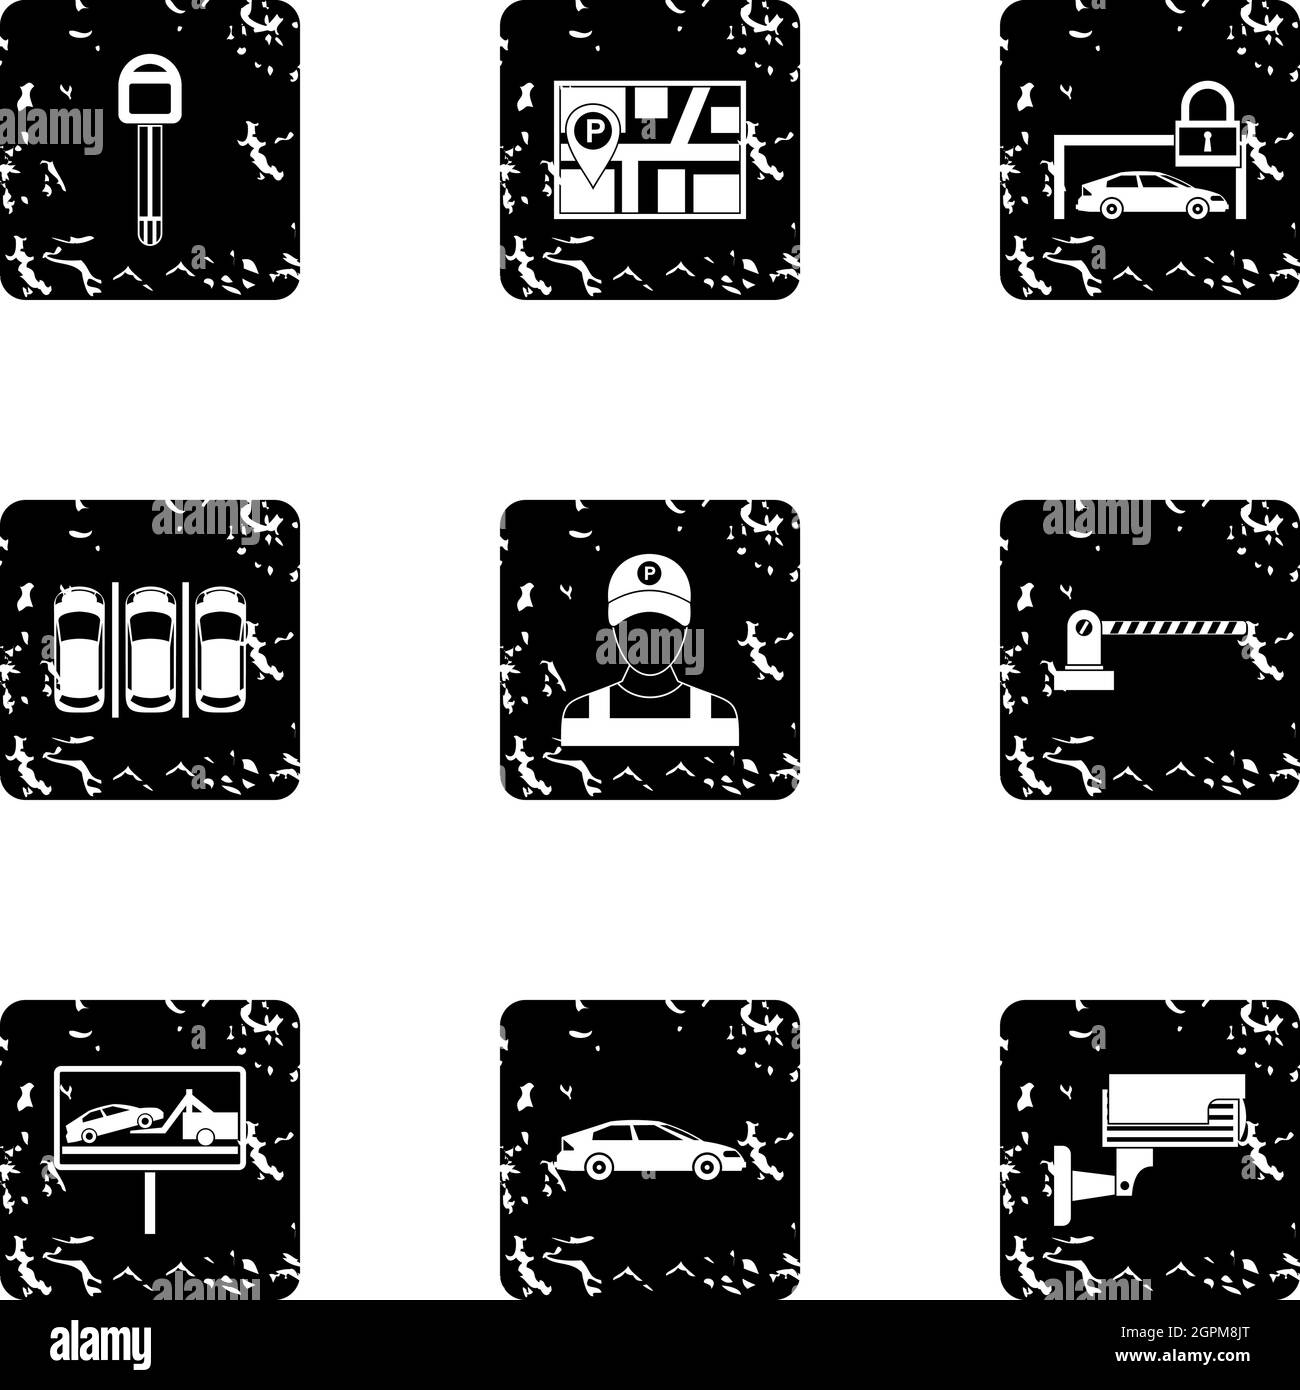 Parking icons set, grunge style Stock Vector